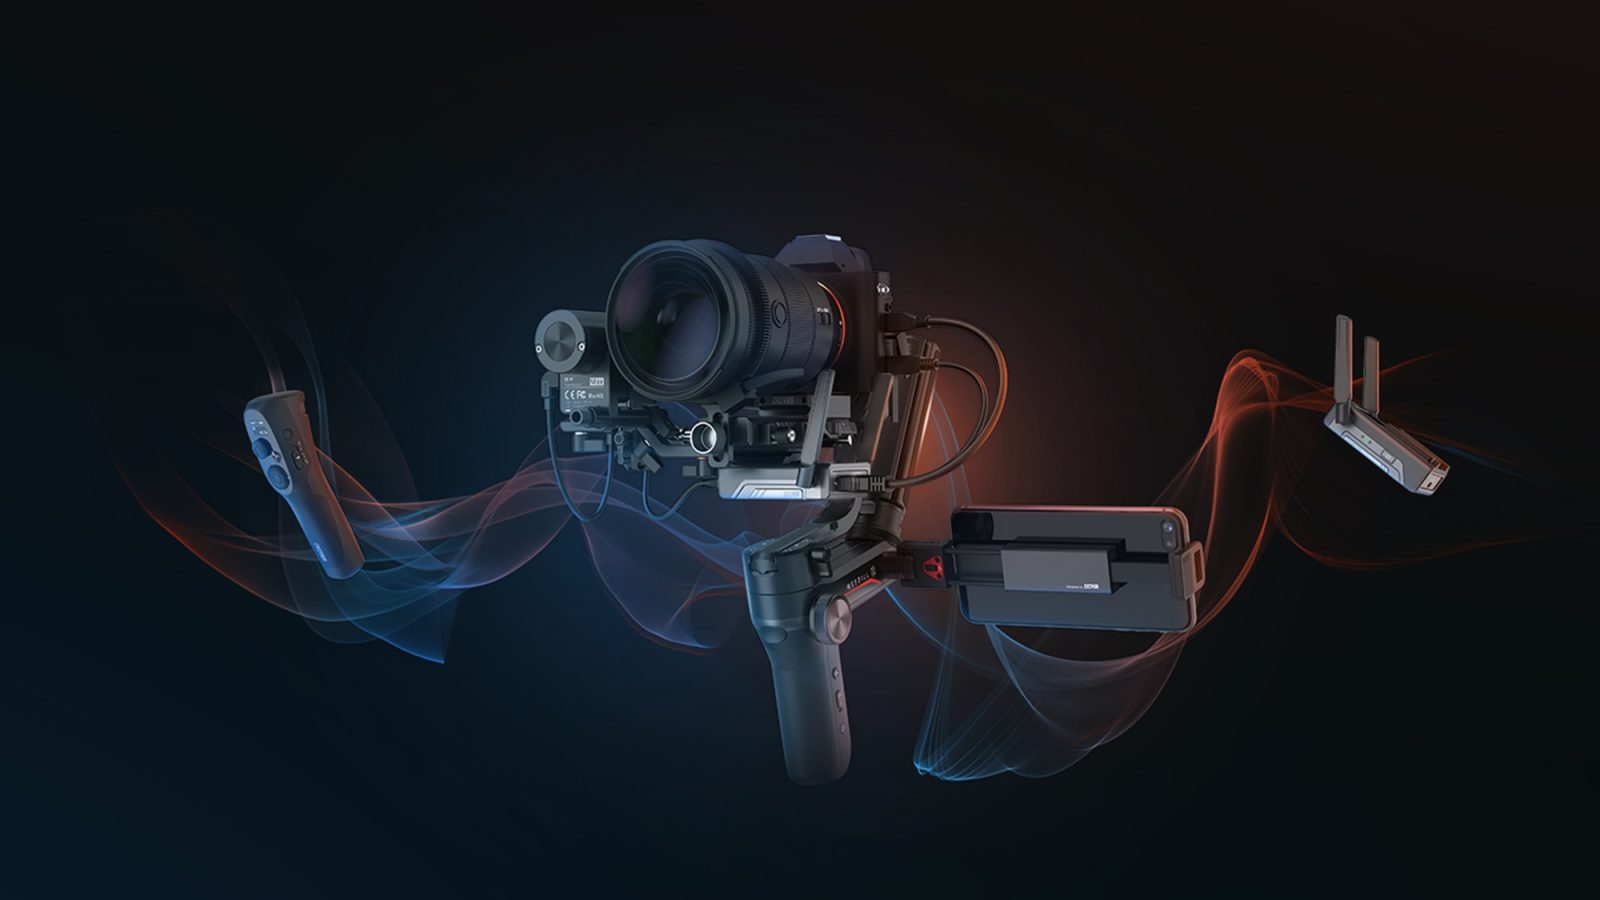 This new gimbal offers ultra-low latency image transmission in 1080p with an all-new TransMount Image Transmission Module.